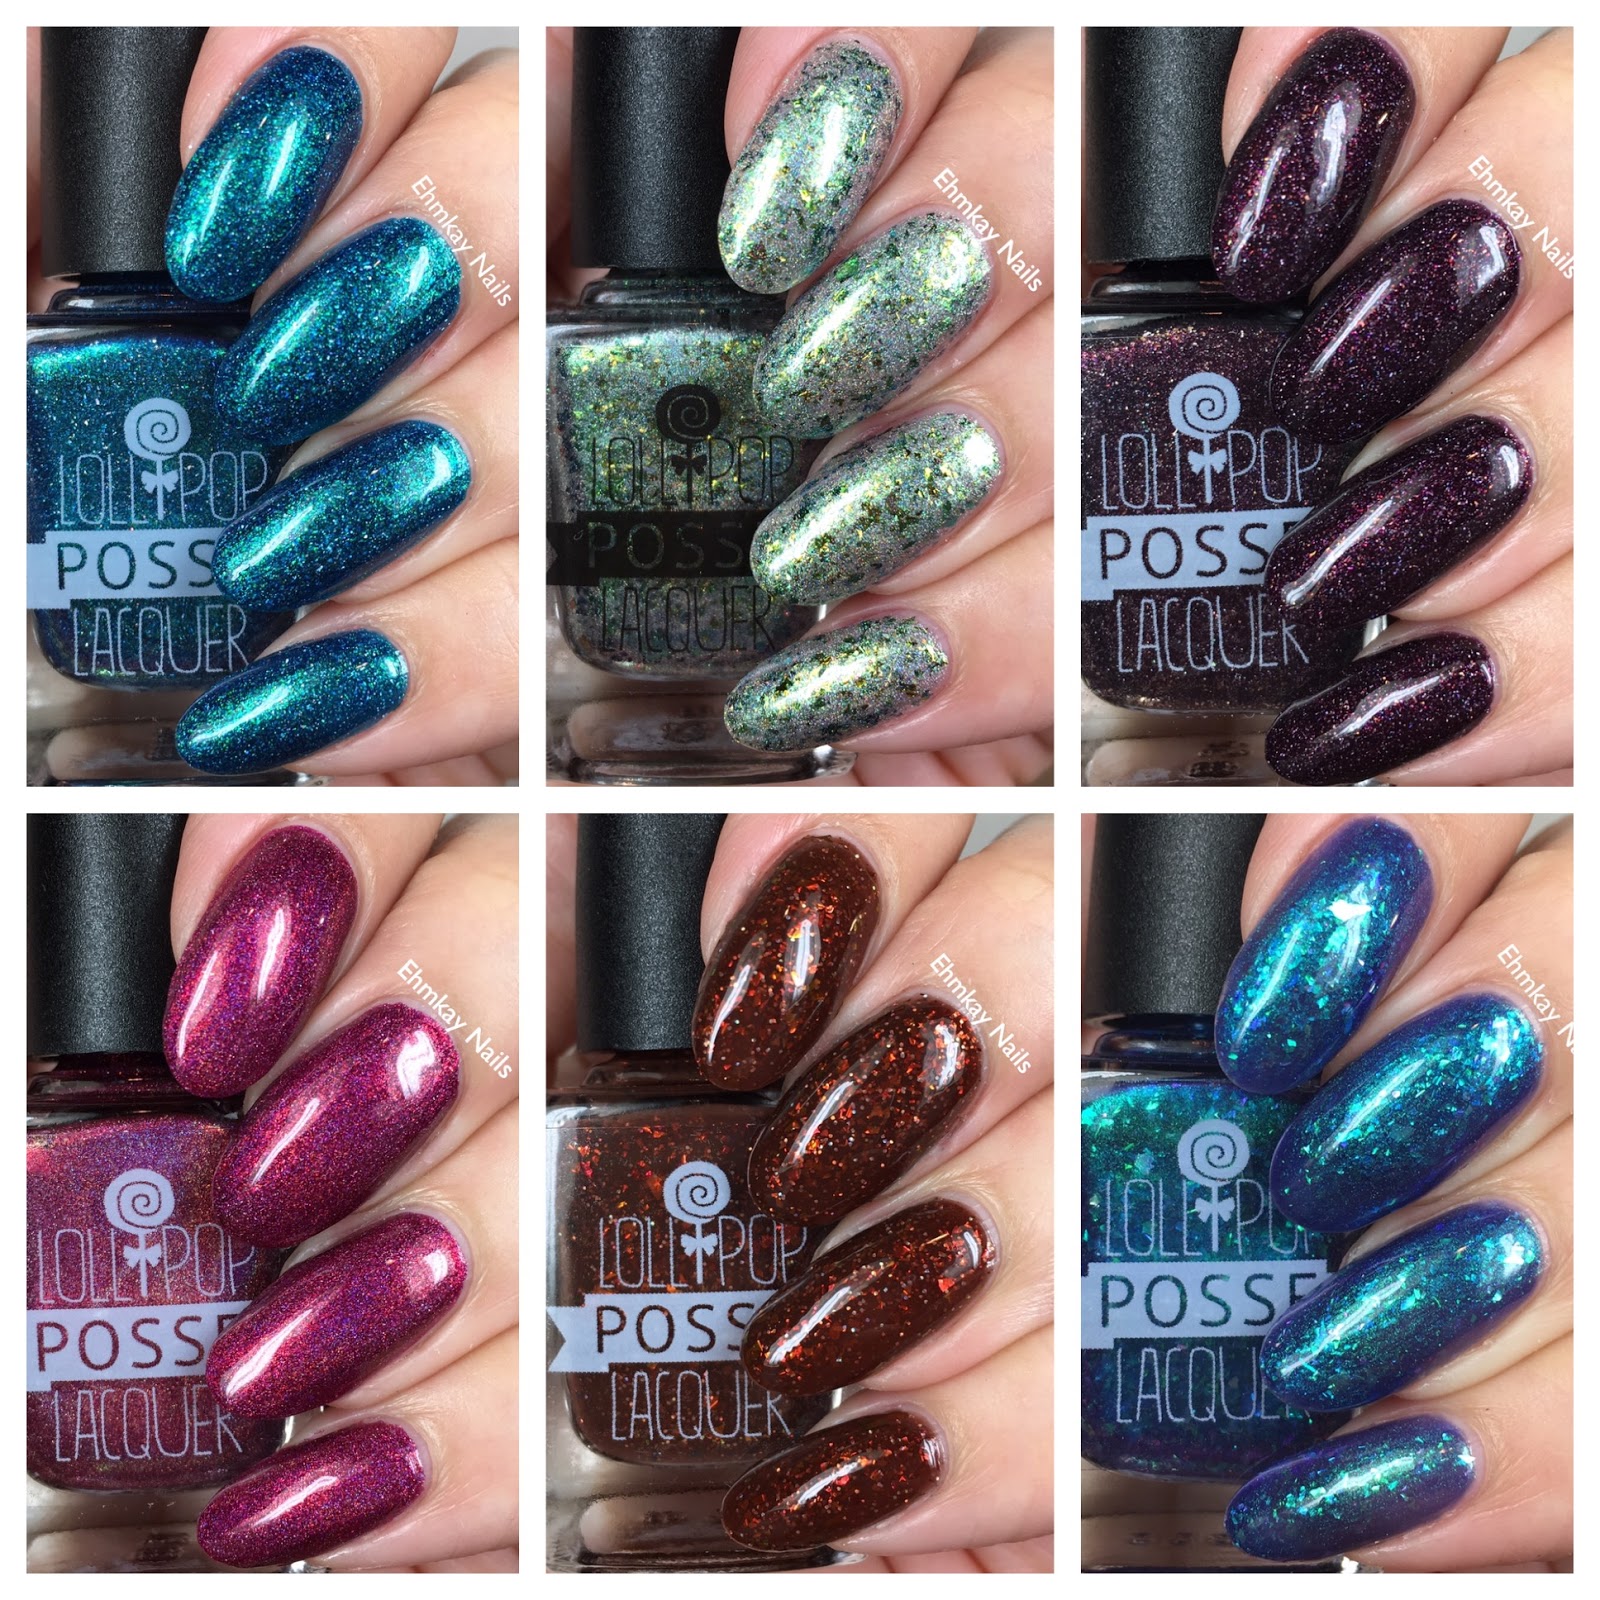 ehmkay nails: Halloween Nightscape with Lollipop Posse Lacquer